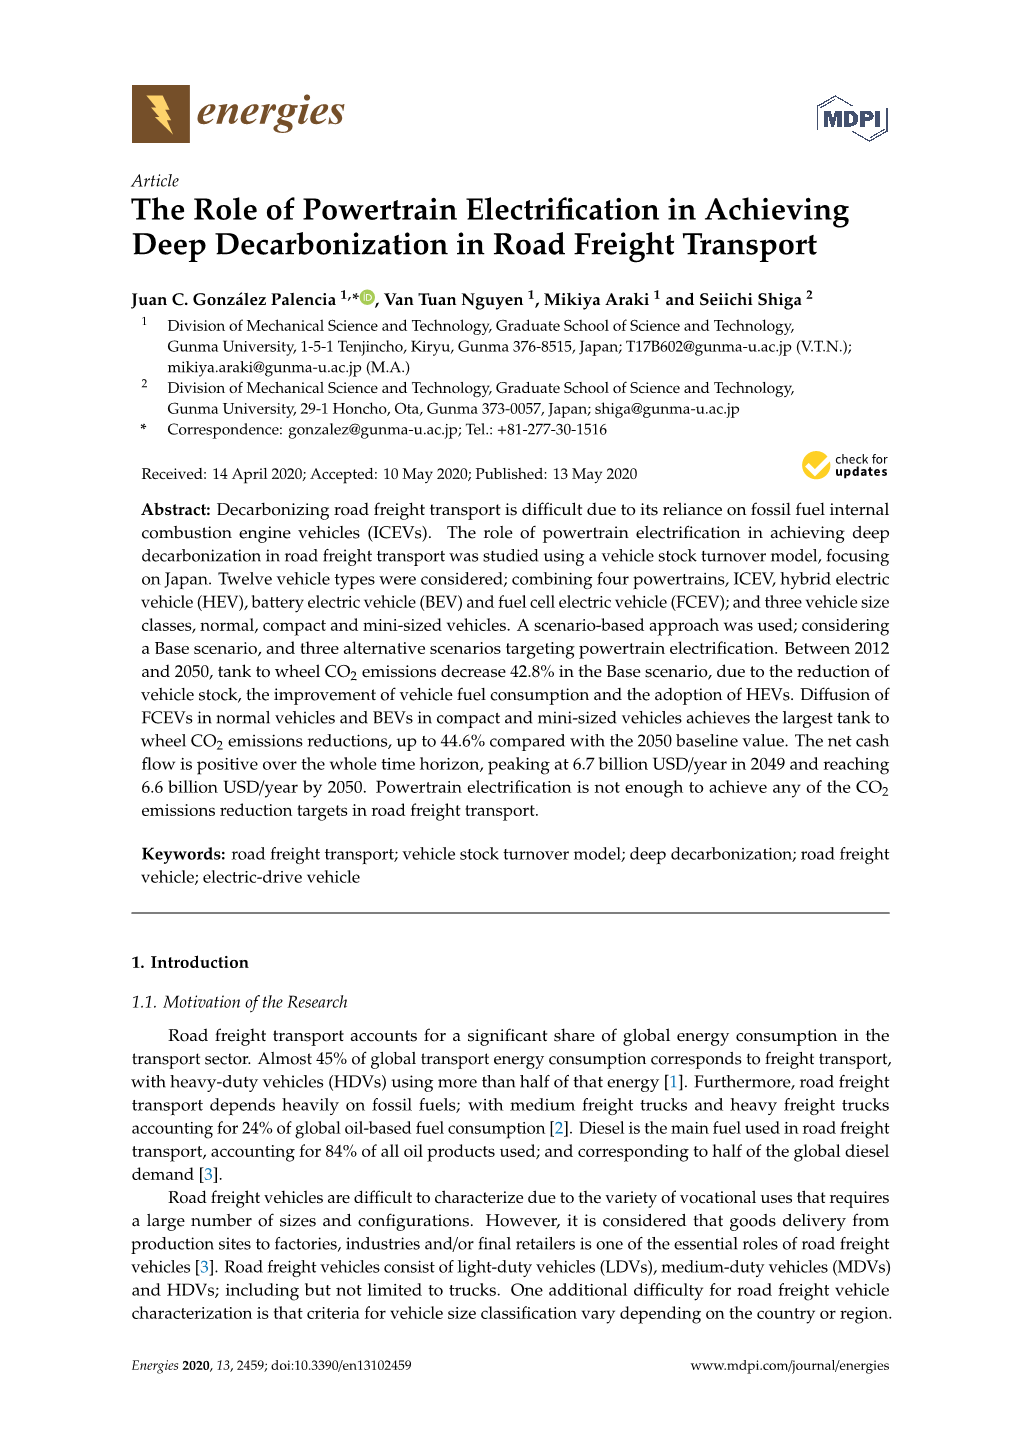 The Role of Powertrain Electrification in Achieving Deep Decarbonization